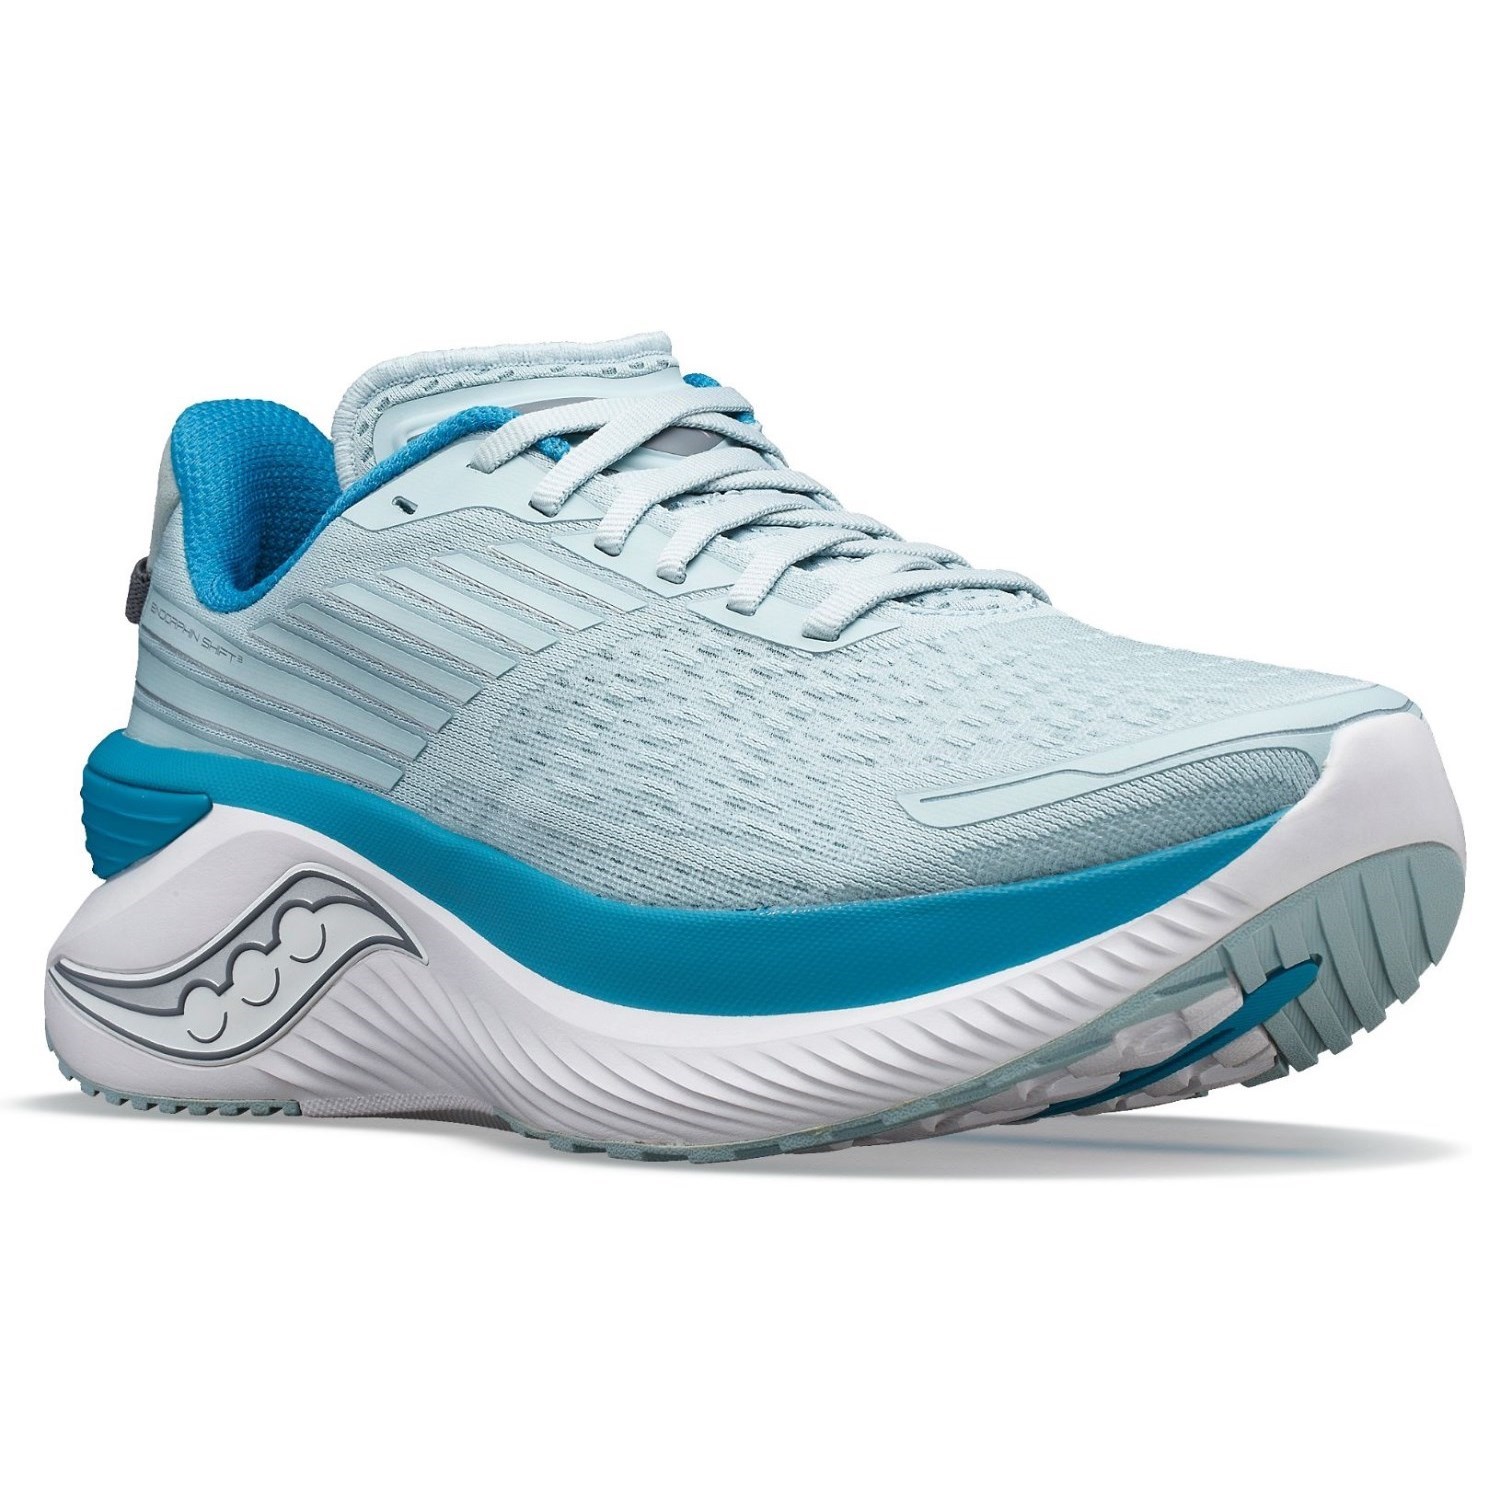 Saucony Endorphin Shift 3 - Womens Running Shoes - Glacier/Ink | Sportitude